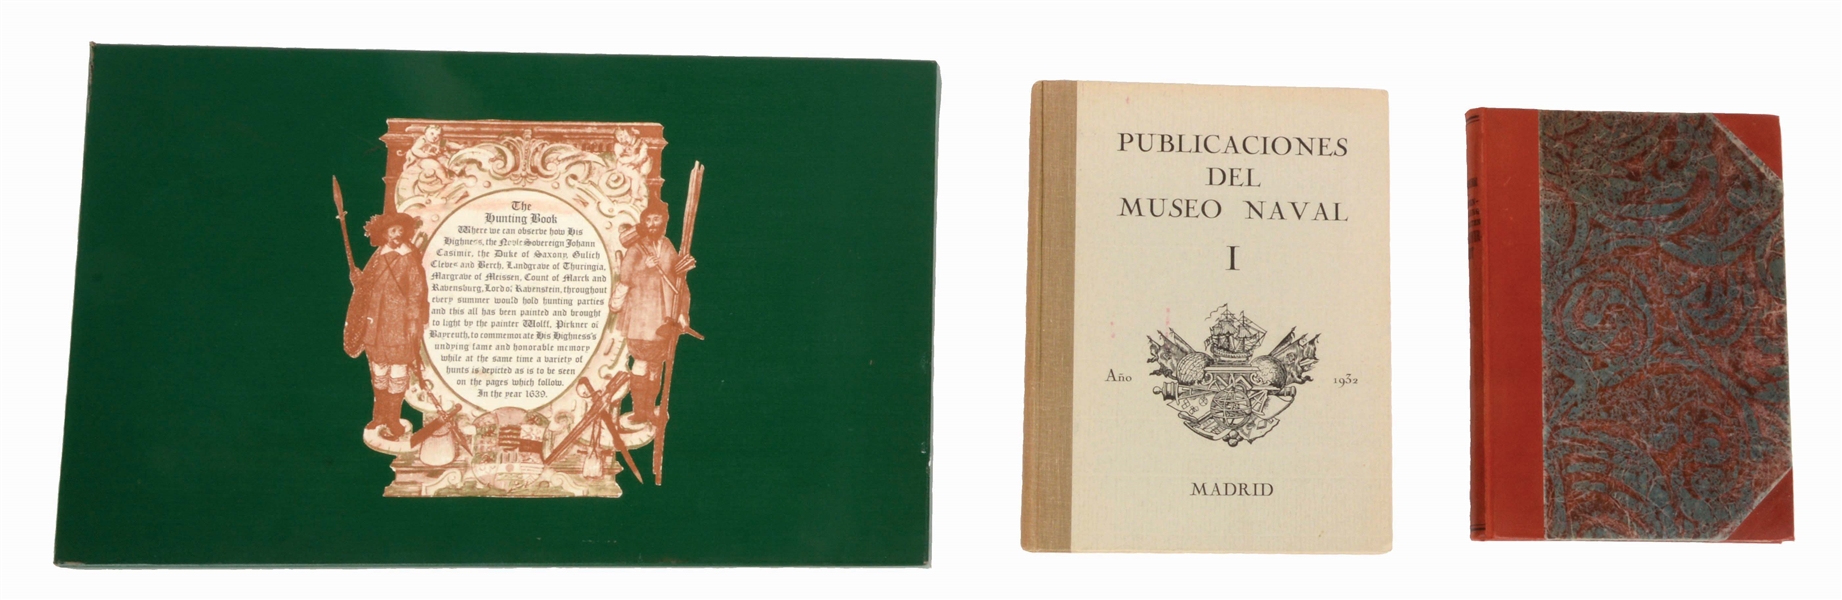 LOT OF 3: THREE REFERENCE BOOKS INCLUDING "THE HUNTING BOOK" BY LINDER, DIE WAFFENSAMMLUNG DES FURSTEN SALM-REFFERSCHEIDT ZU SCHLOSS DYCK BY EHRENTHAL, AND PUBLICATION DEL MUSEO NAVAL FROM MADRID.